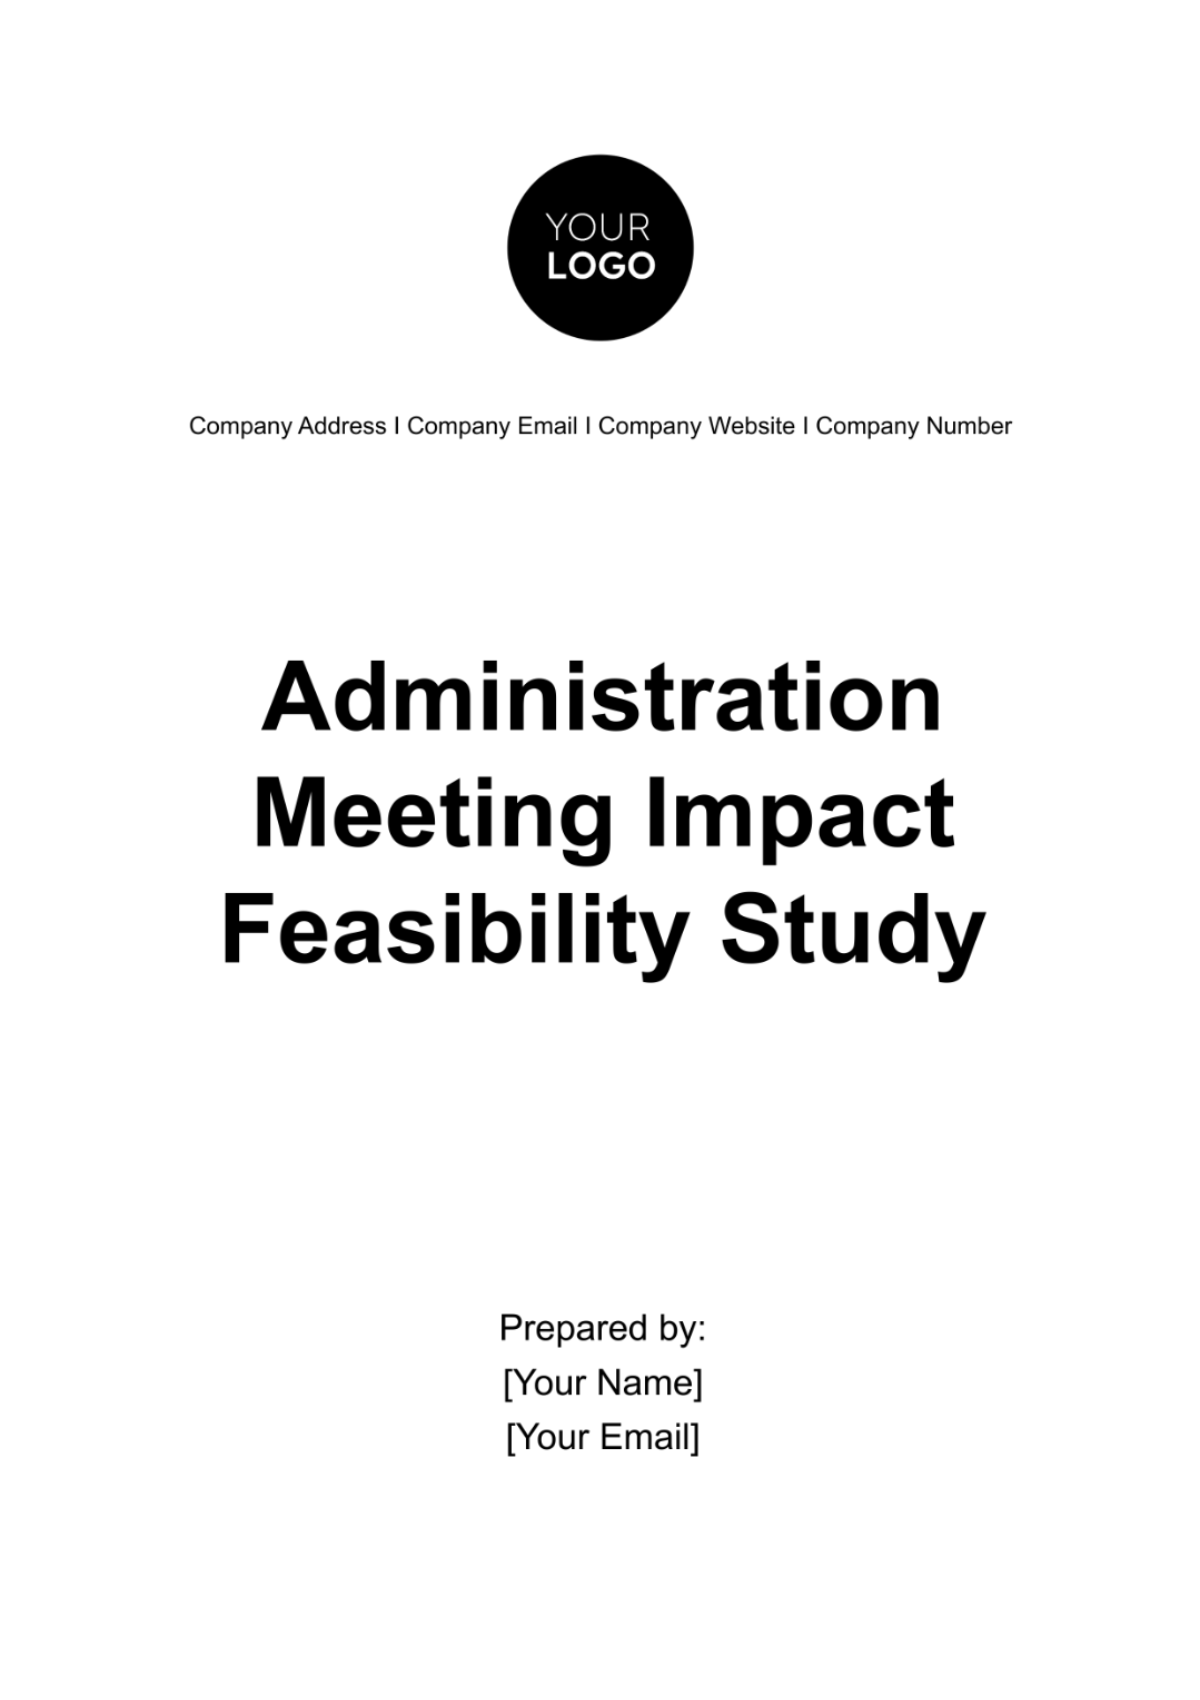 Administration Meeting Impact Feasibility Study Template